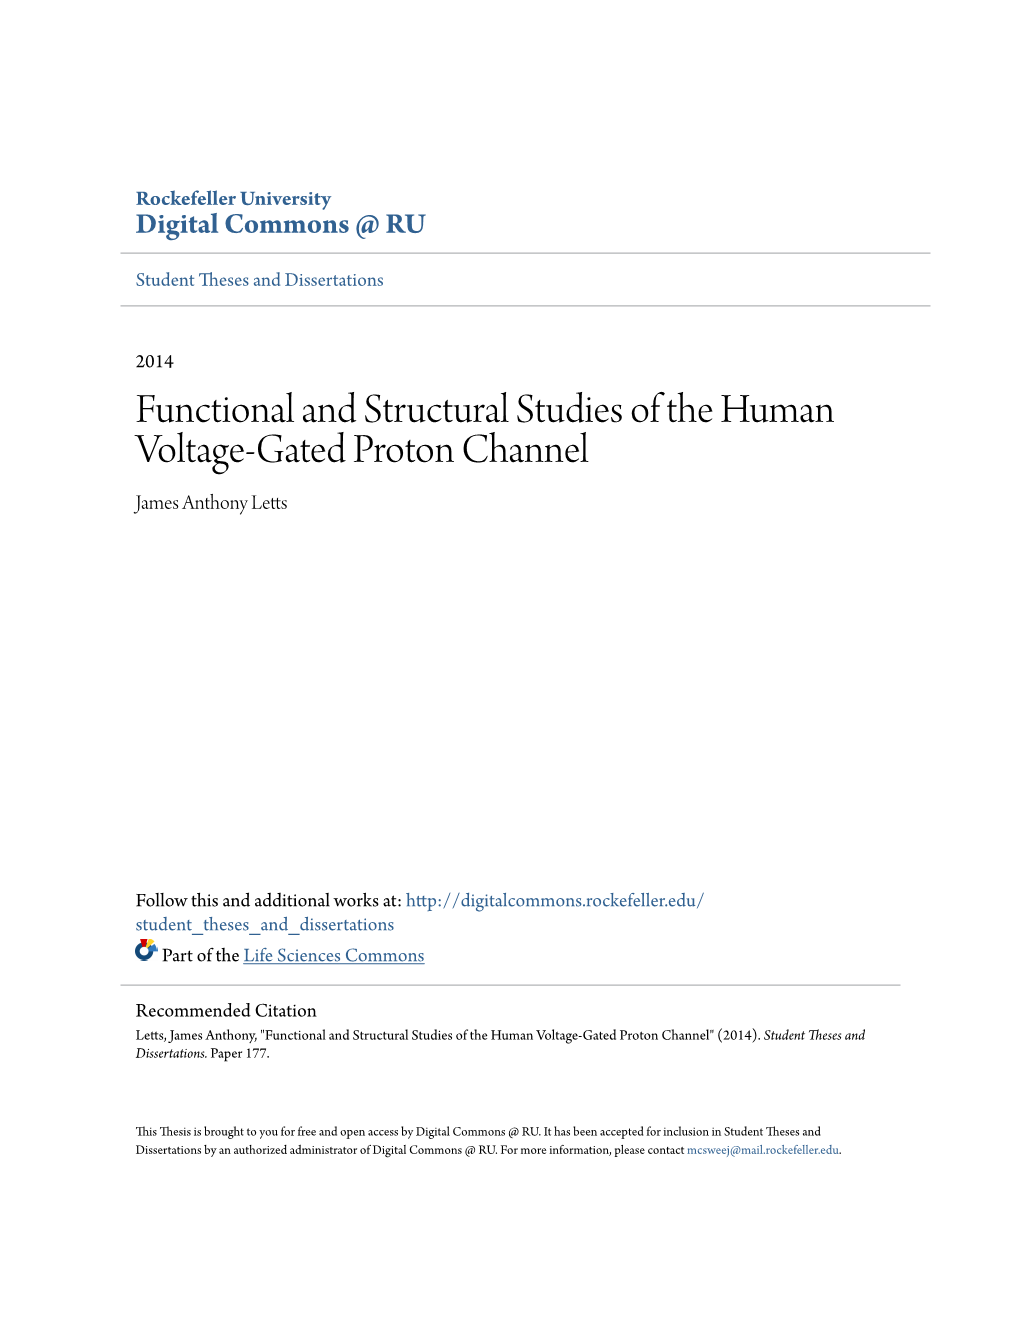 Functional and Structural Studies of the Human Voltage-Gated Proton Channel James Anthony Letts